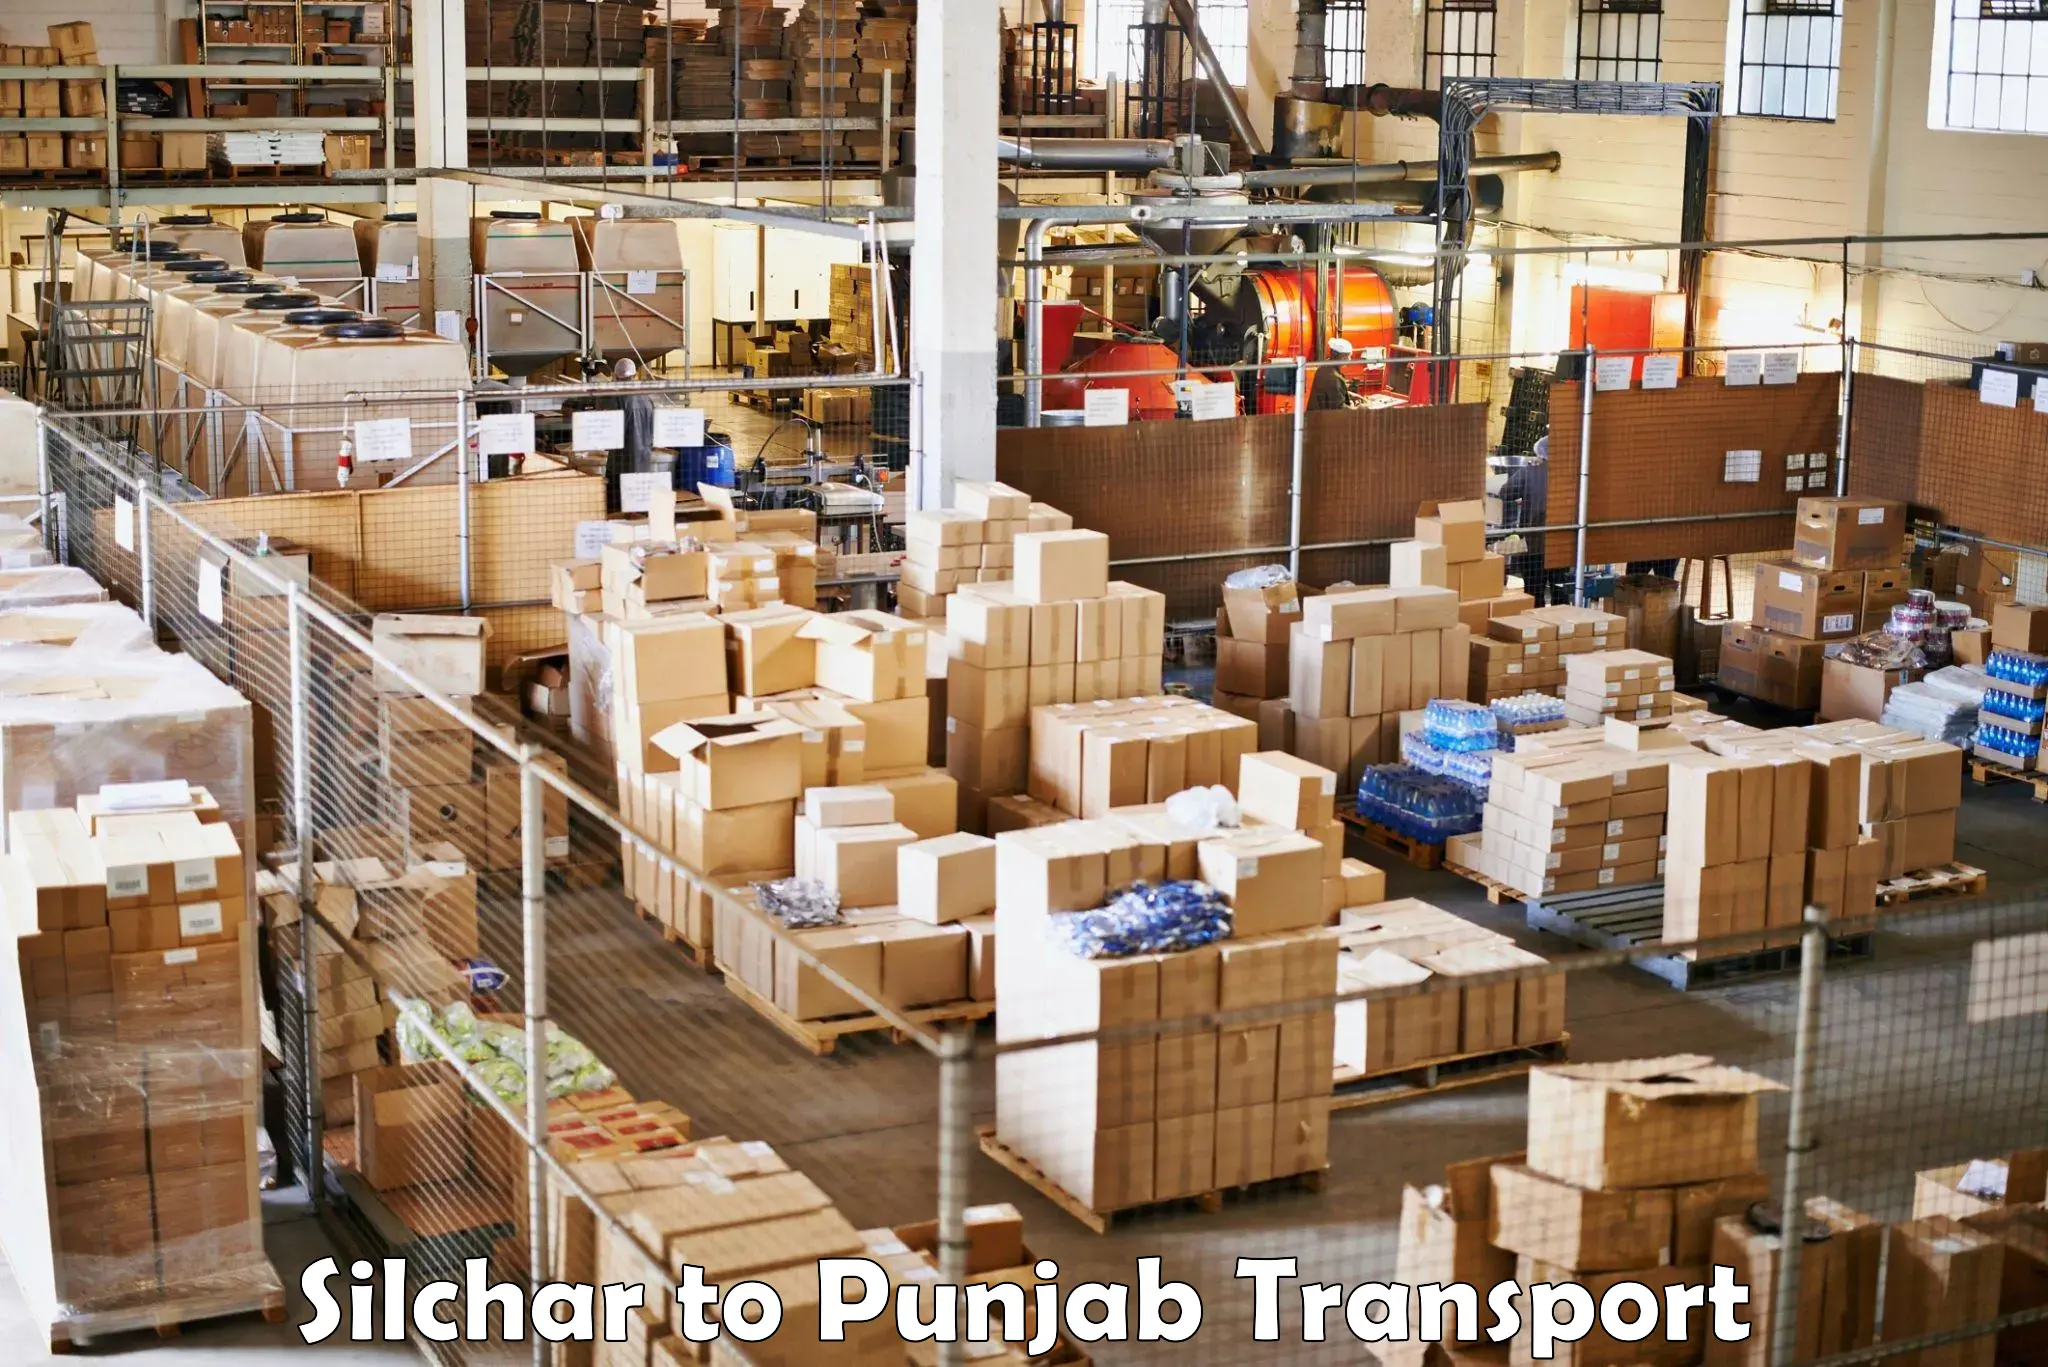 Commercial transport service Silchar to Fatehgarh Sahib